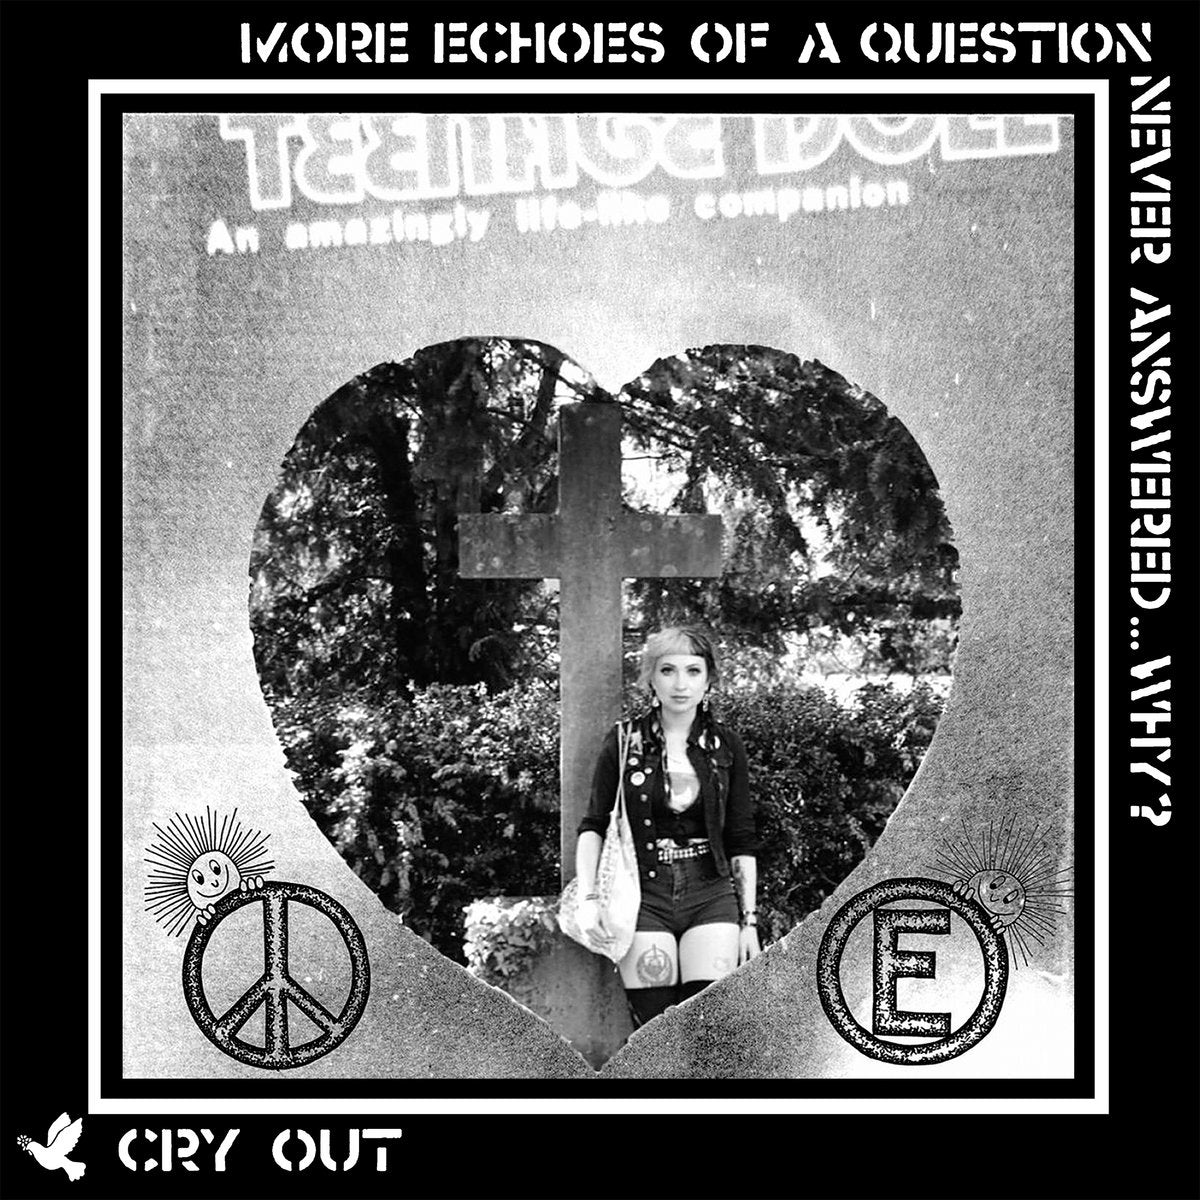 CRY OUT - MORE ECHOES OF A QUESTION NEVER ANSWERED Vinyl LP